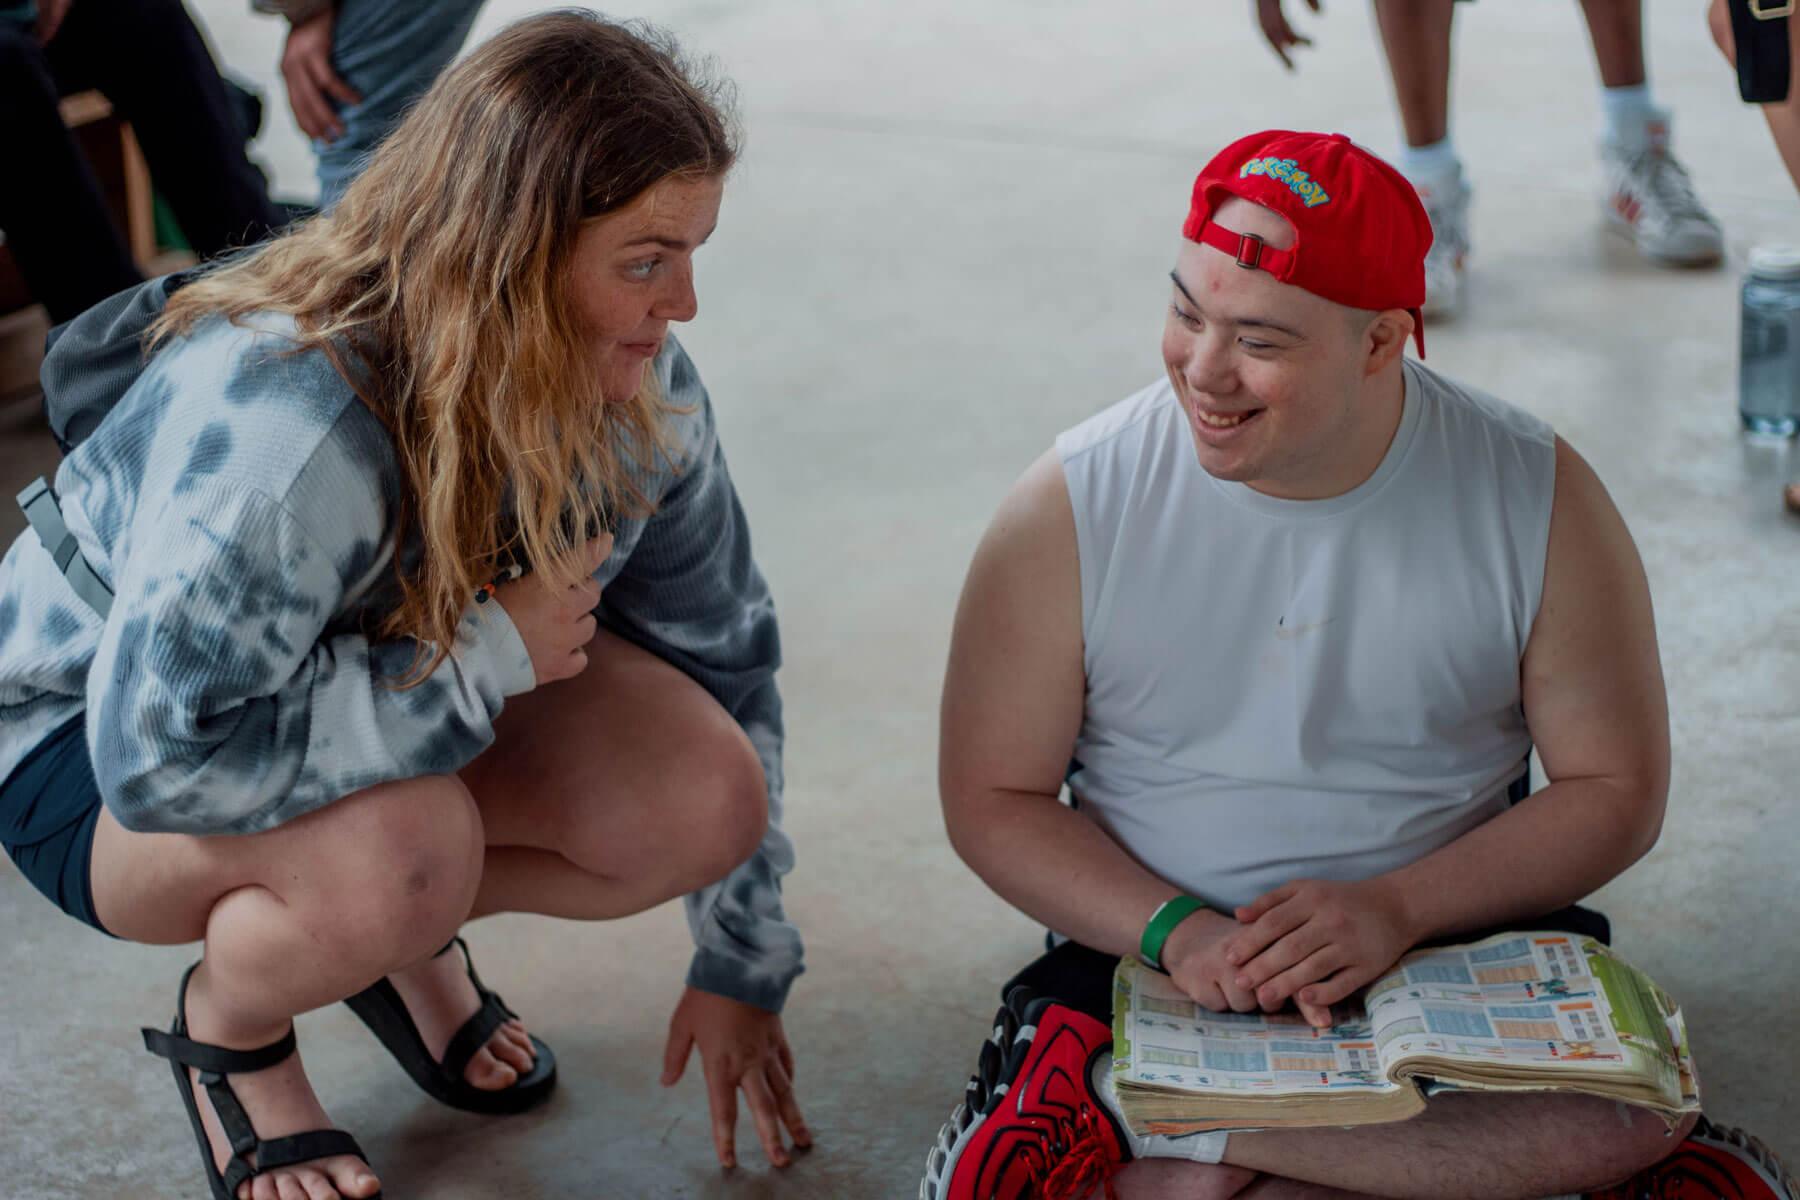 Camp counselor talking to a camper reading the bible